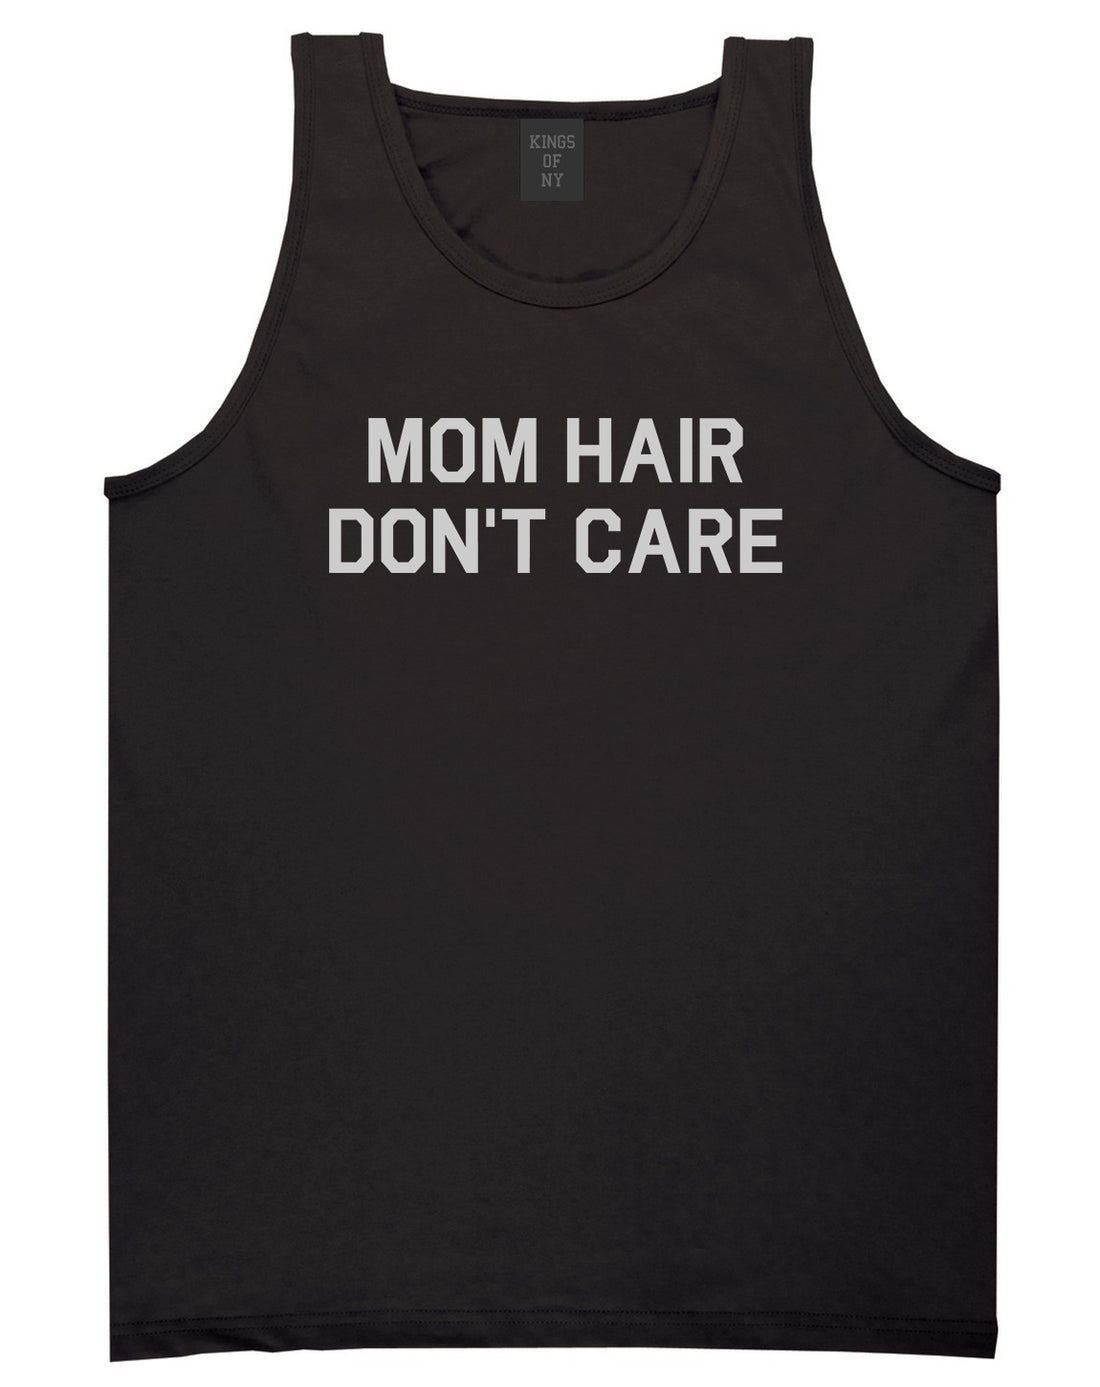 Mom Hair Dont Care Black Tank Top Shirt by Kings Of NY